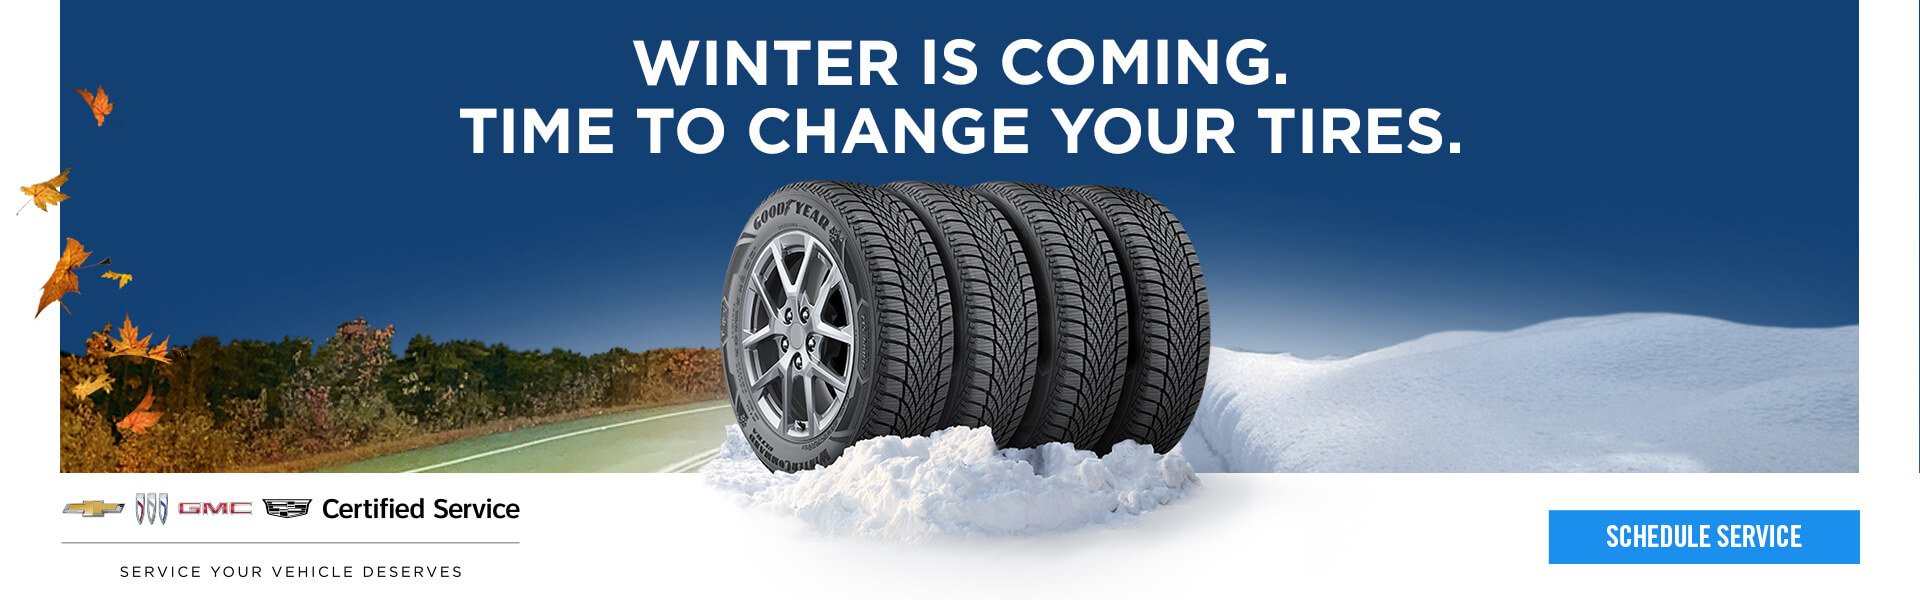 Winter Change your tires - GMCCA